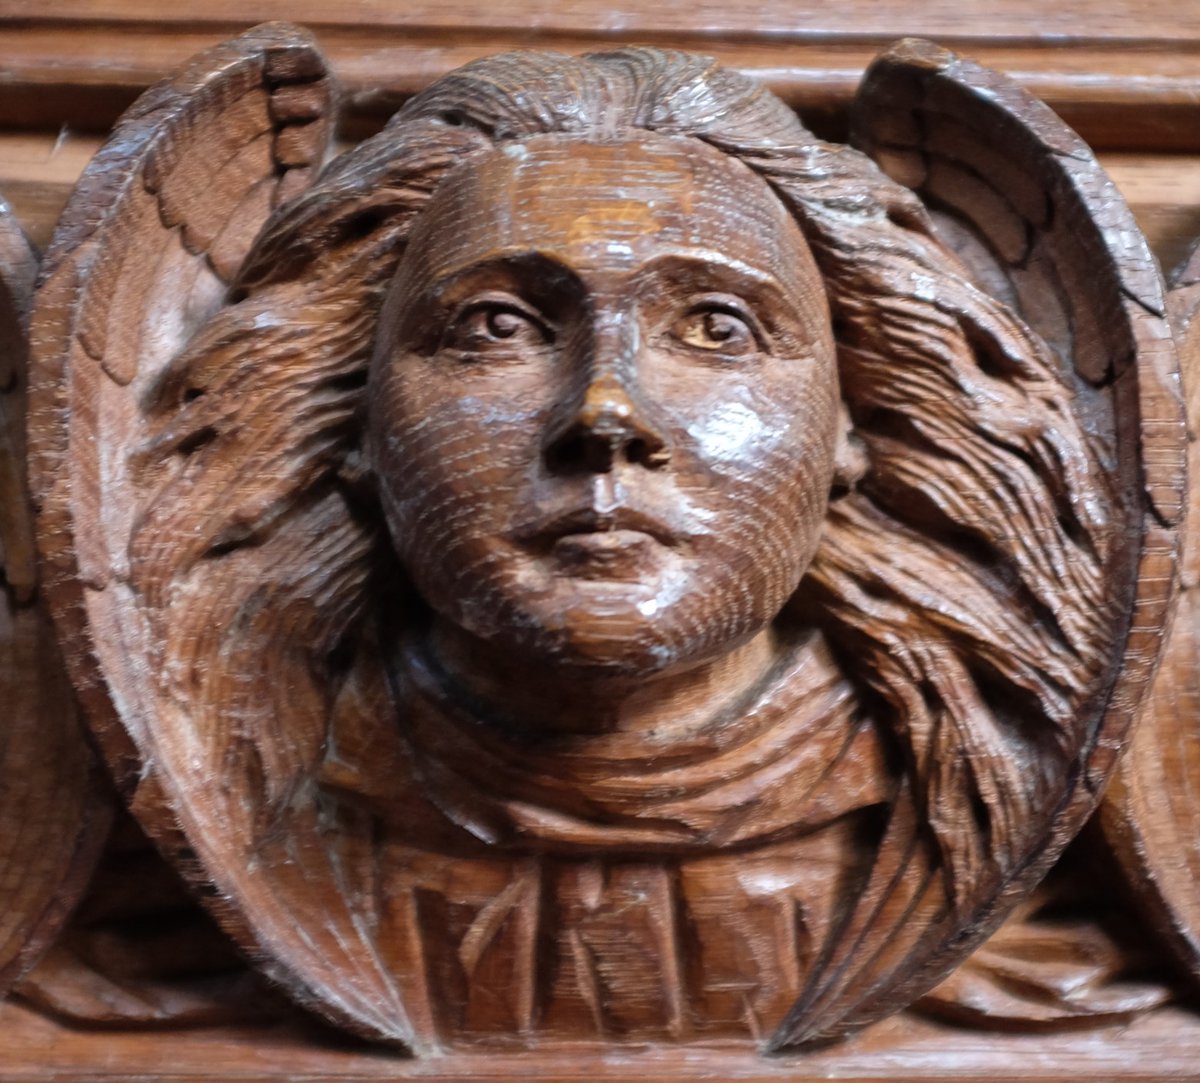 Ermington #Devon Characterful heads at the base of the pulpit carved by the #Pinwill sisters for their father's church in 1889 are said to represent the sisters themselves. If so, these two are Violet and Mary, I reckon. 📸: my own #WoodcarvingWednesday